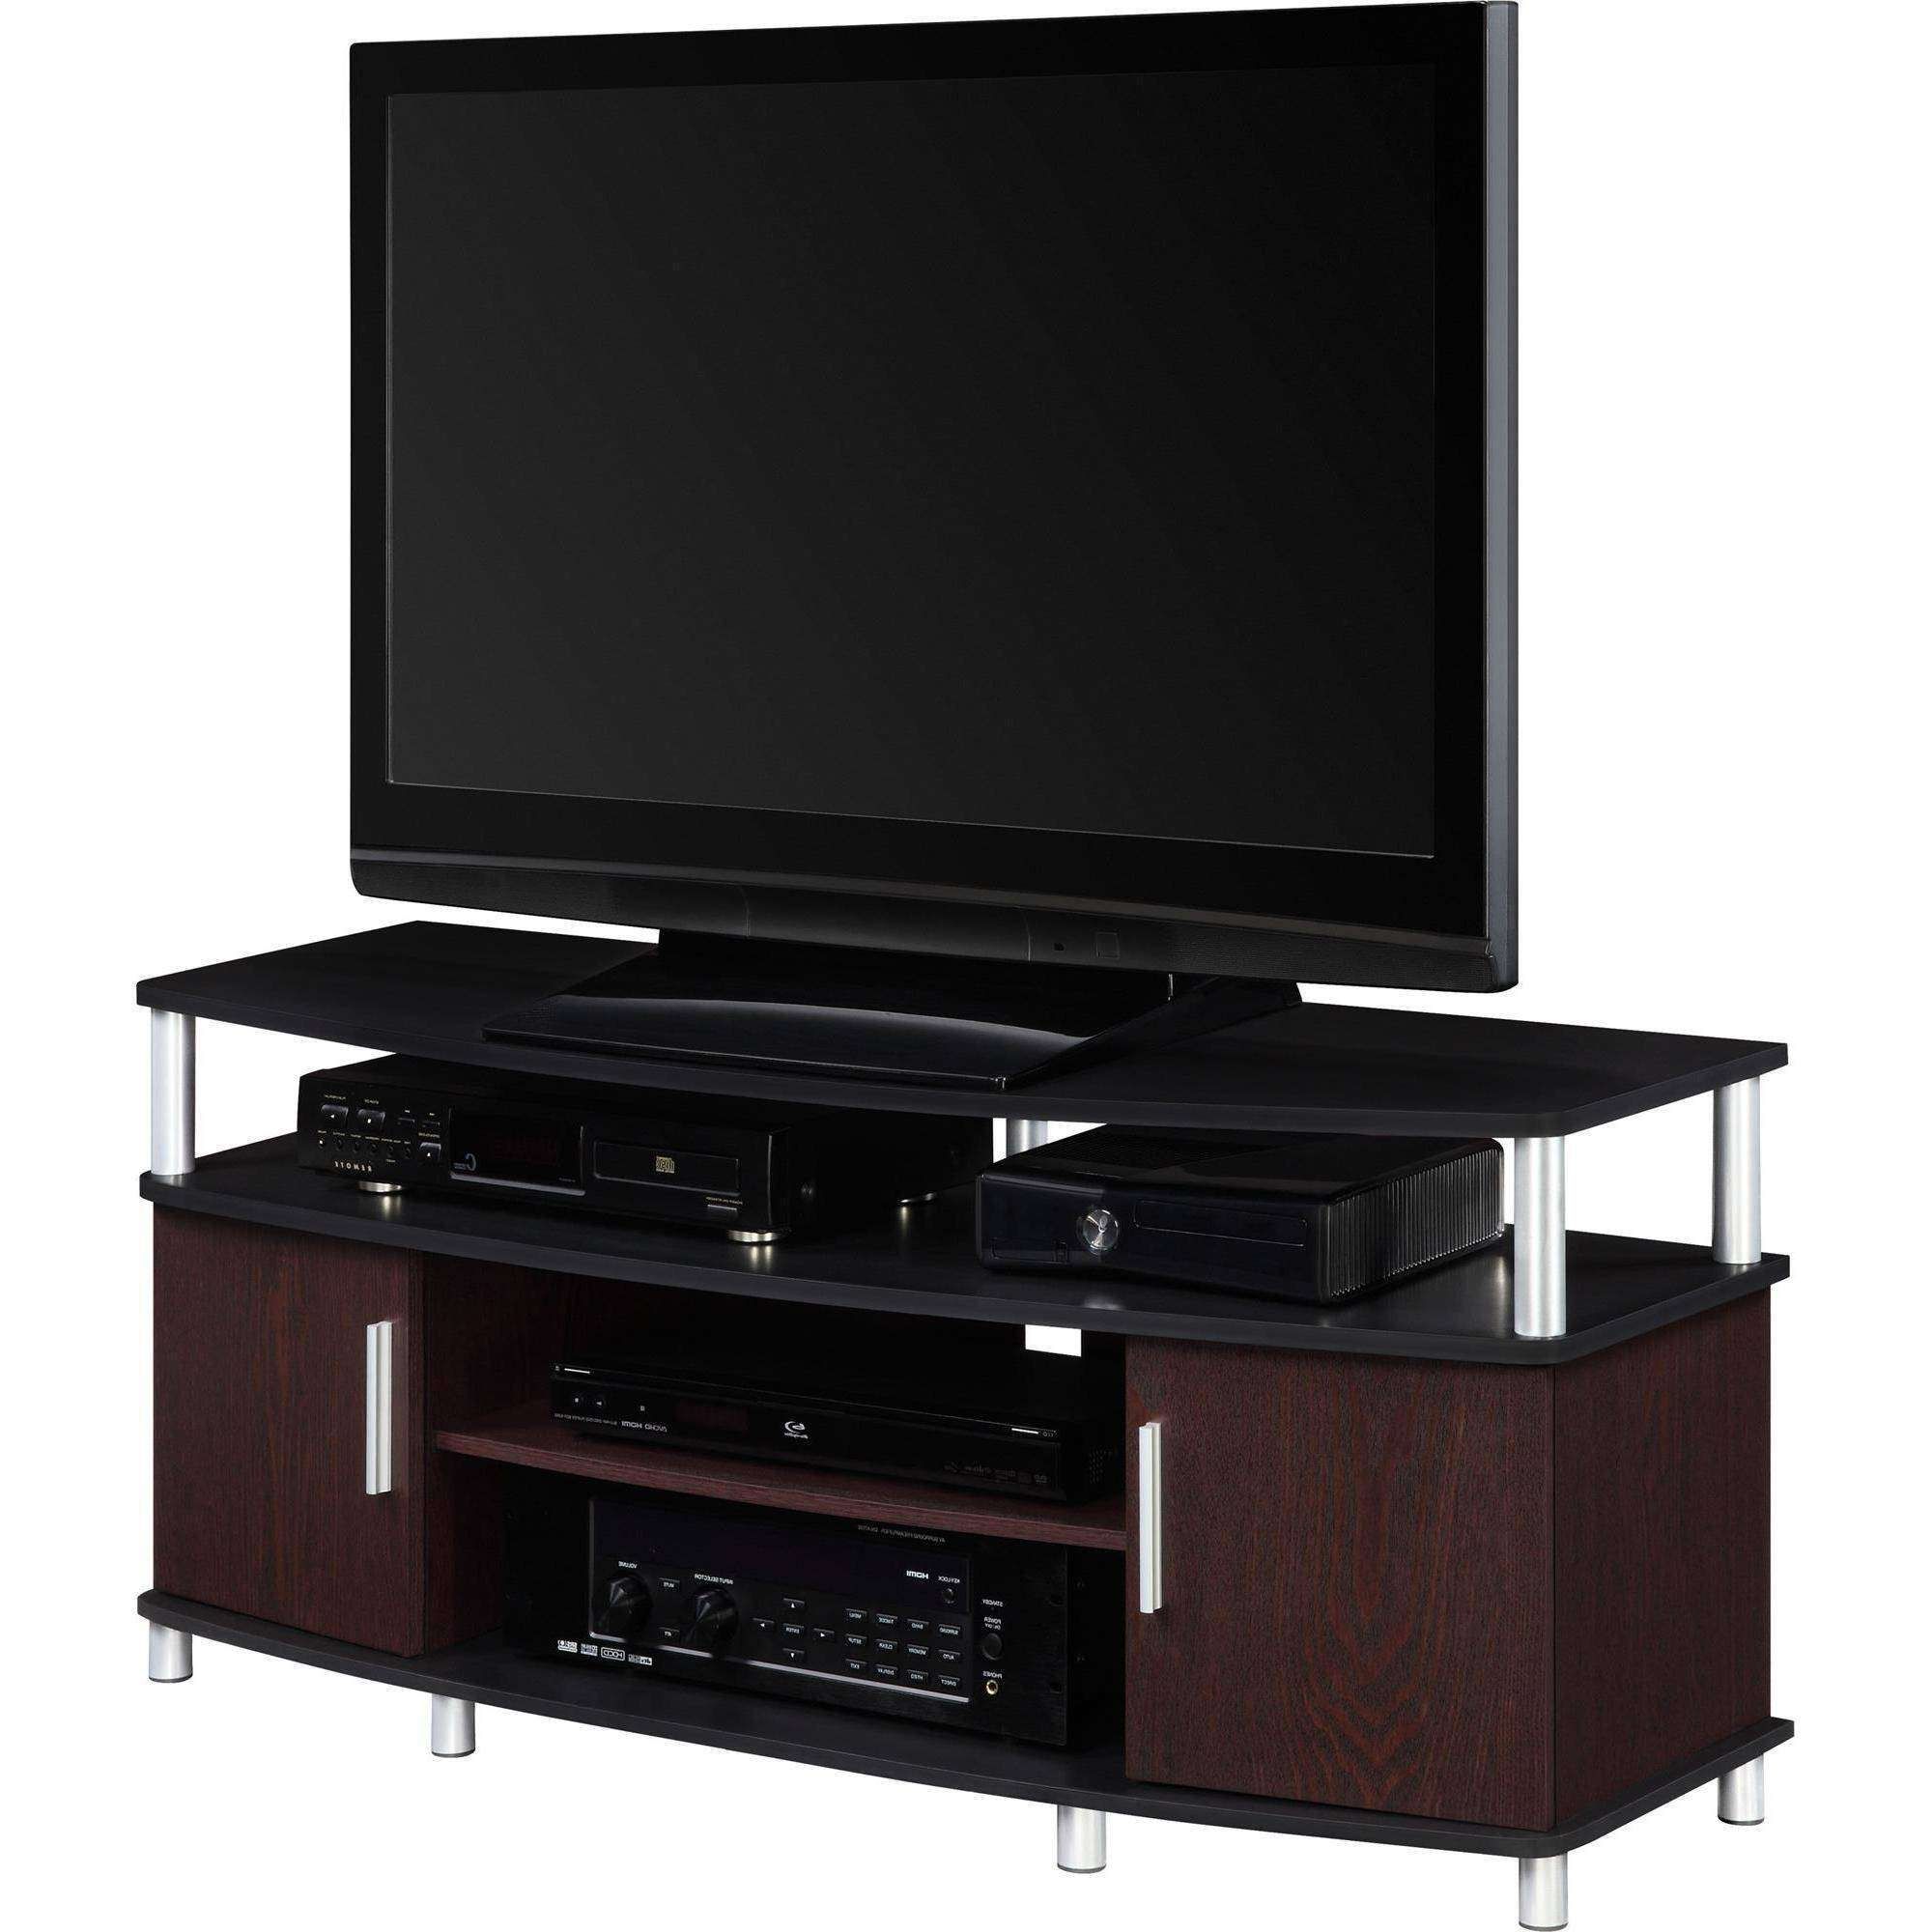 Wall Units. Amusing Walmart Tv Stands And Entertainment Centers With Wooden Tv Stands For 50 Inch Tv (Gallery 3 of 15)